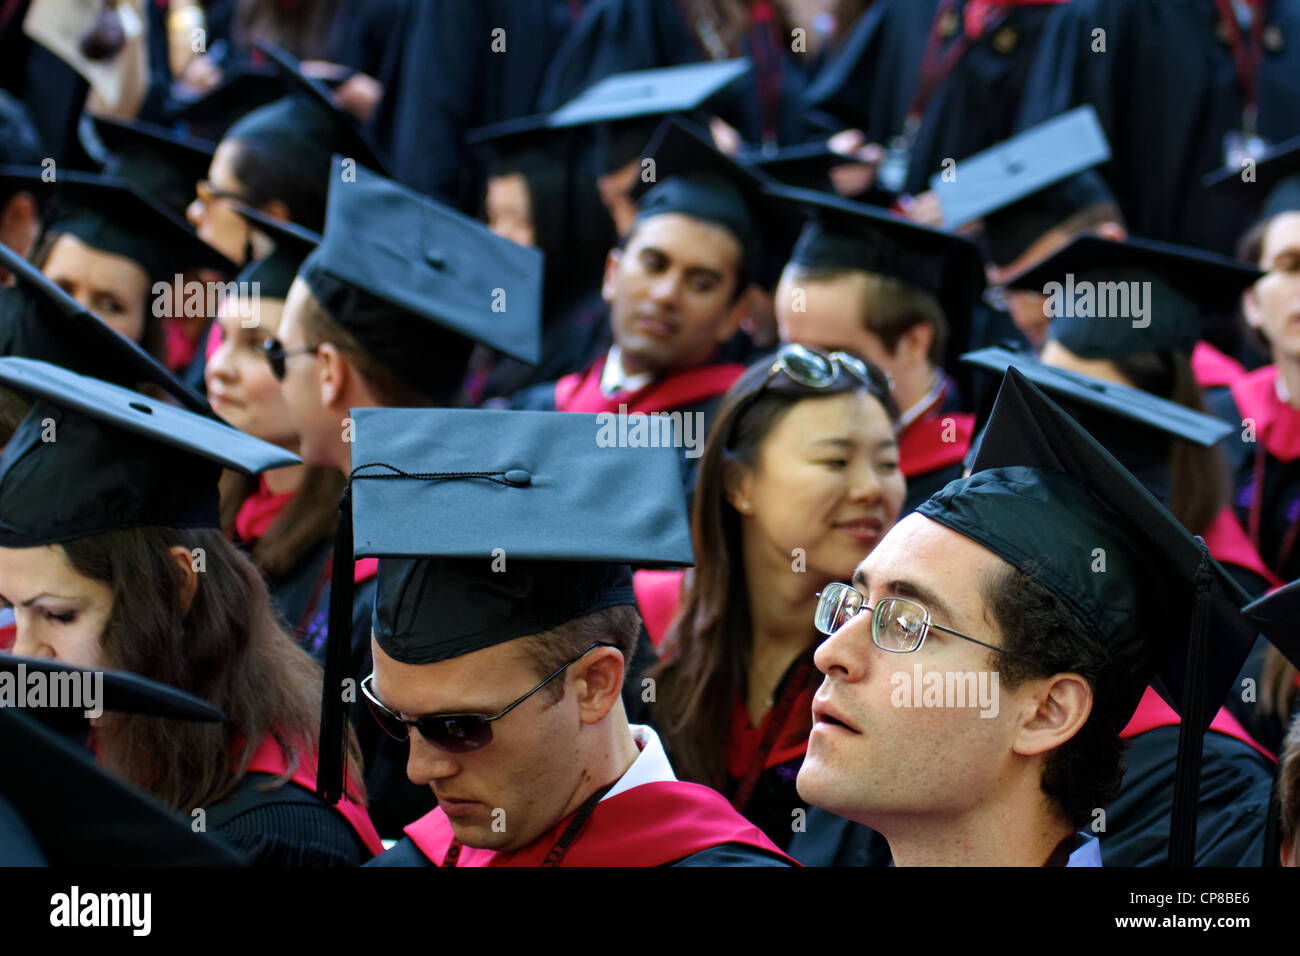 Students of Harvard University gather for their graduation ceremonies on Commencement Day on May 26, 2011 in Cambridge, MA. Stock Photo